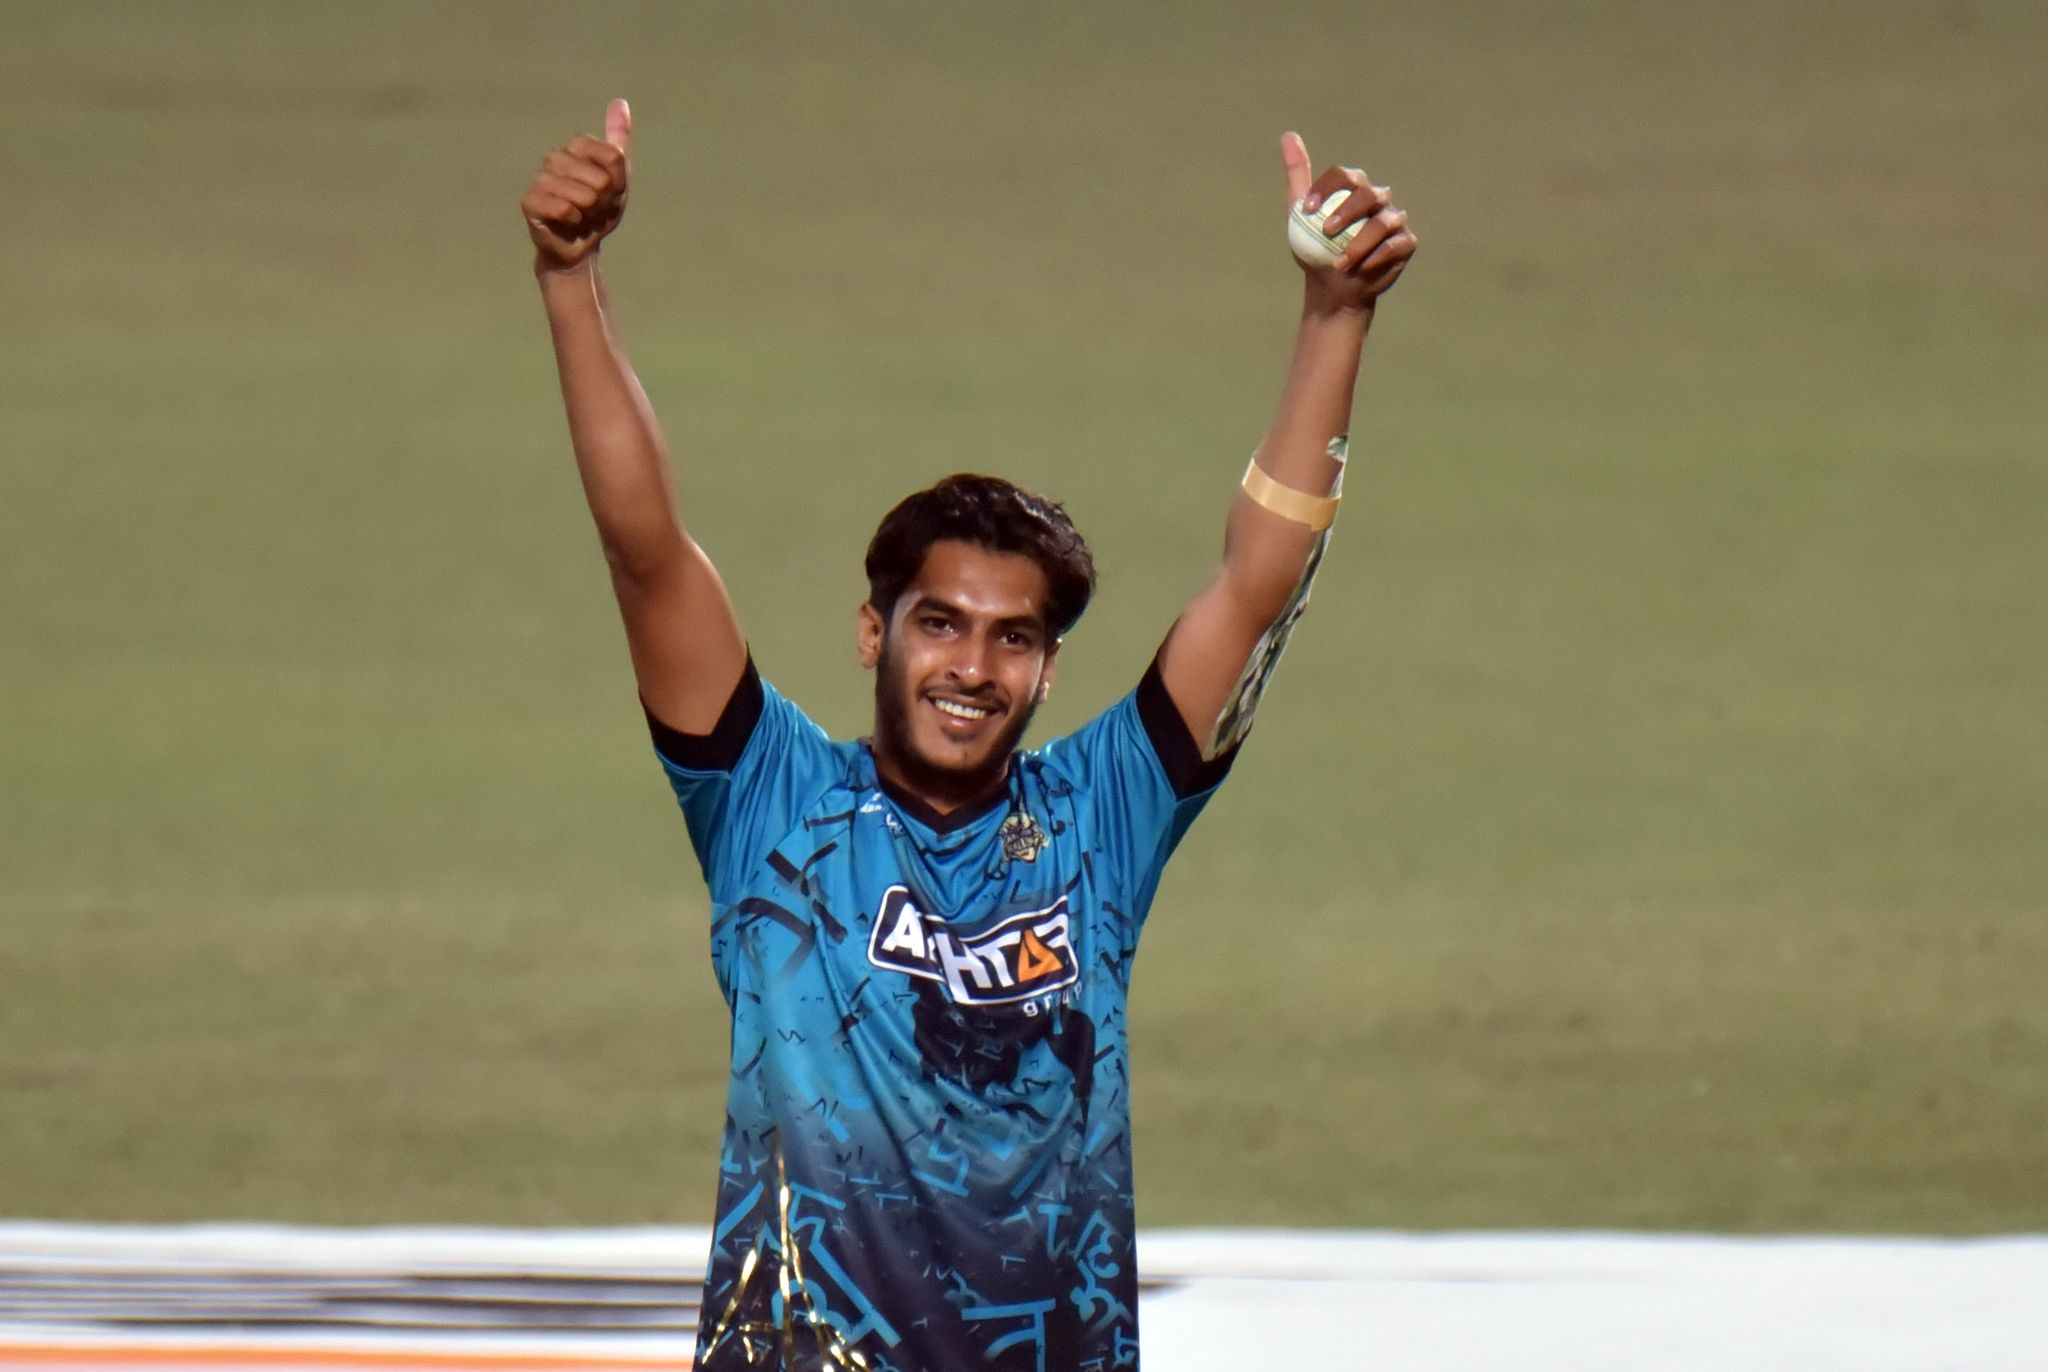 Mrittunjoy Chowdhury claims the first hat-trick of BPL 2022. #BPL